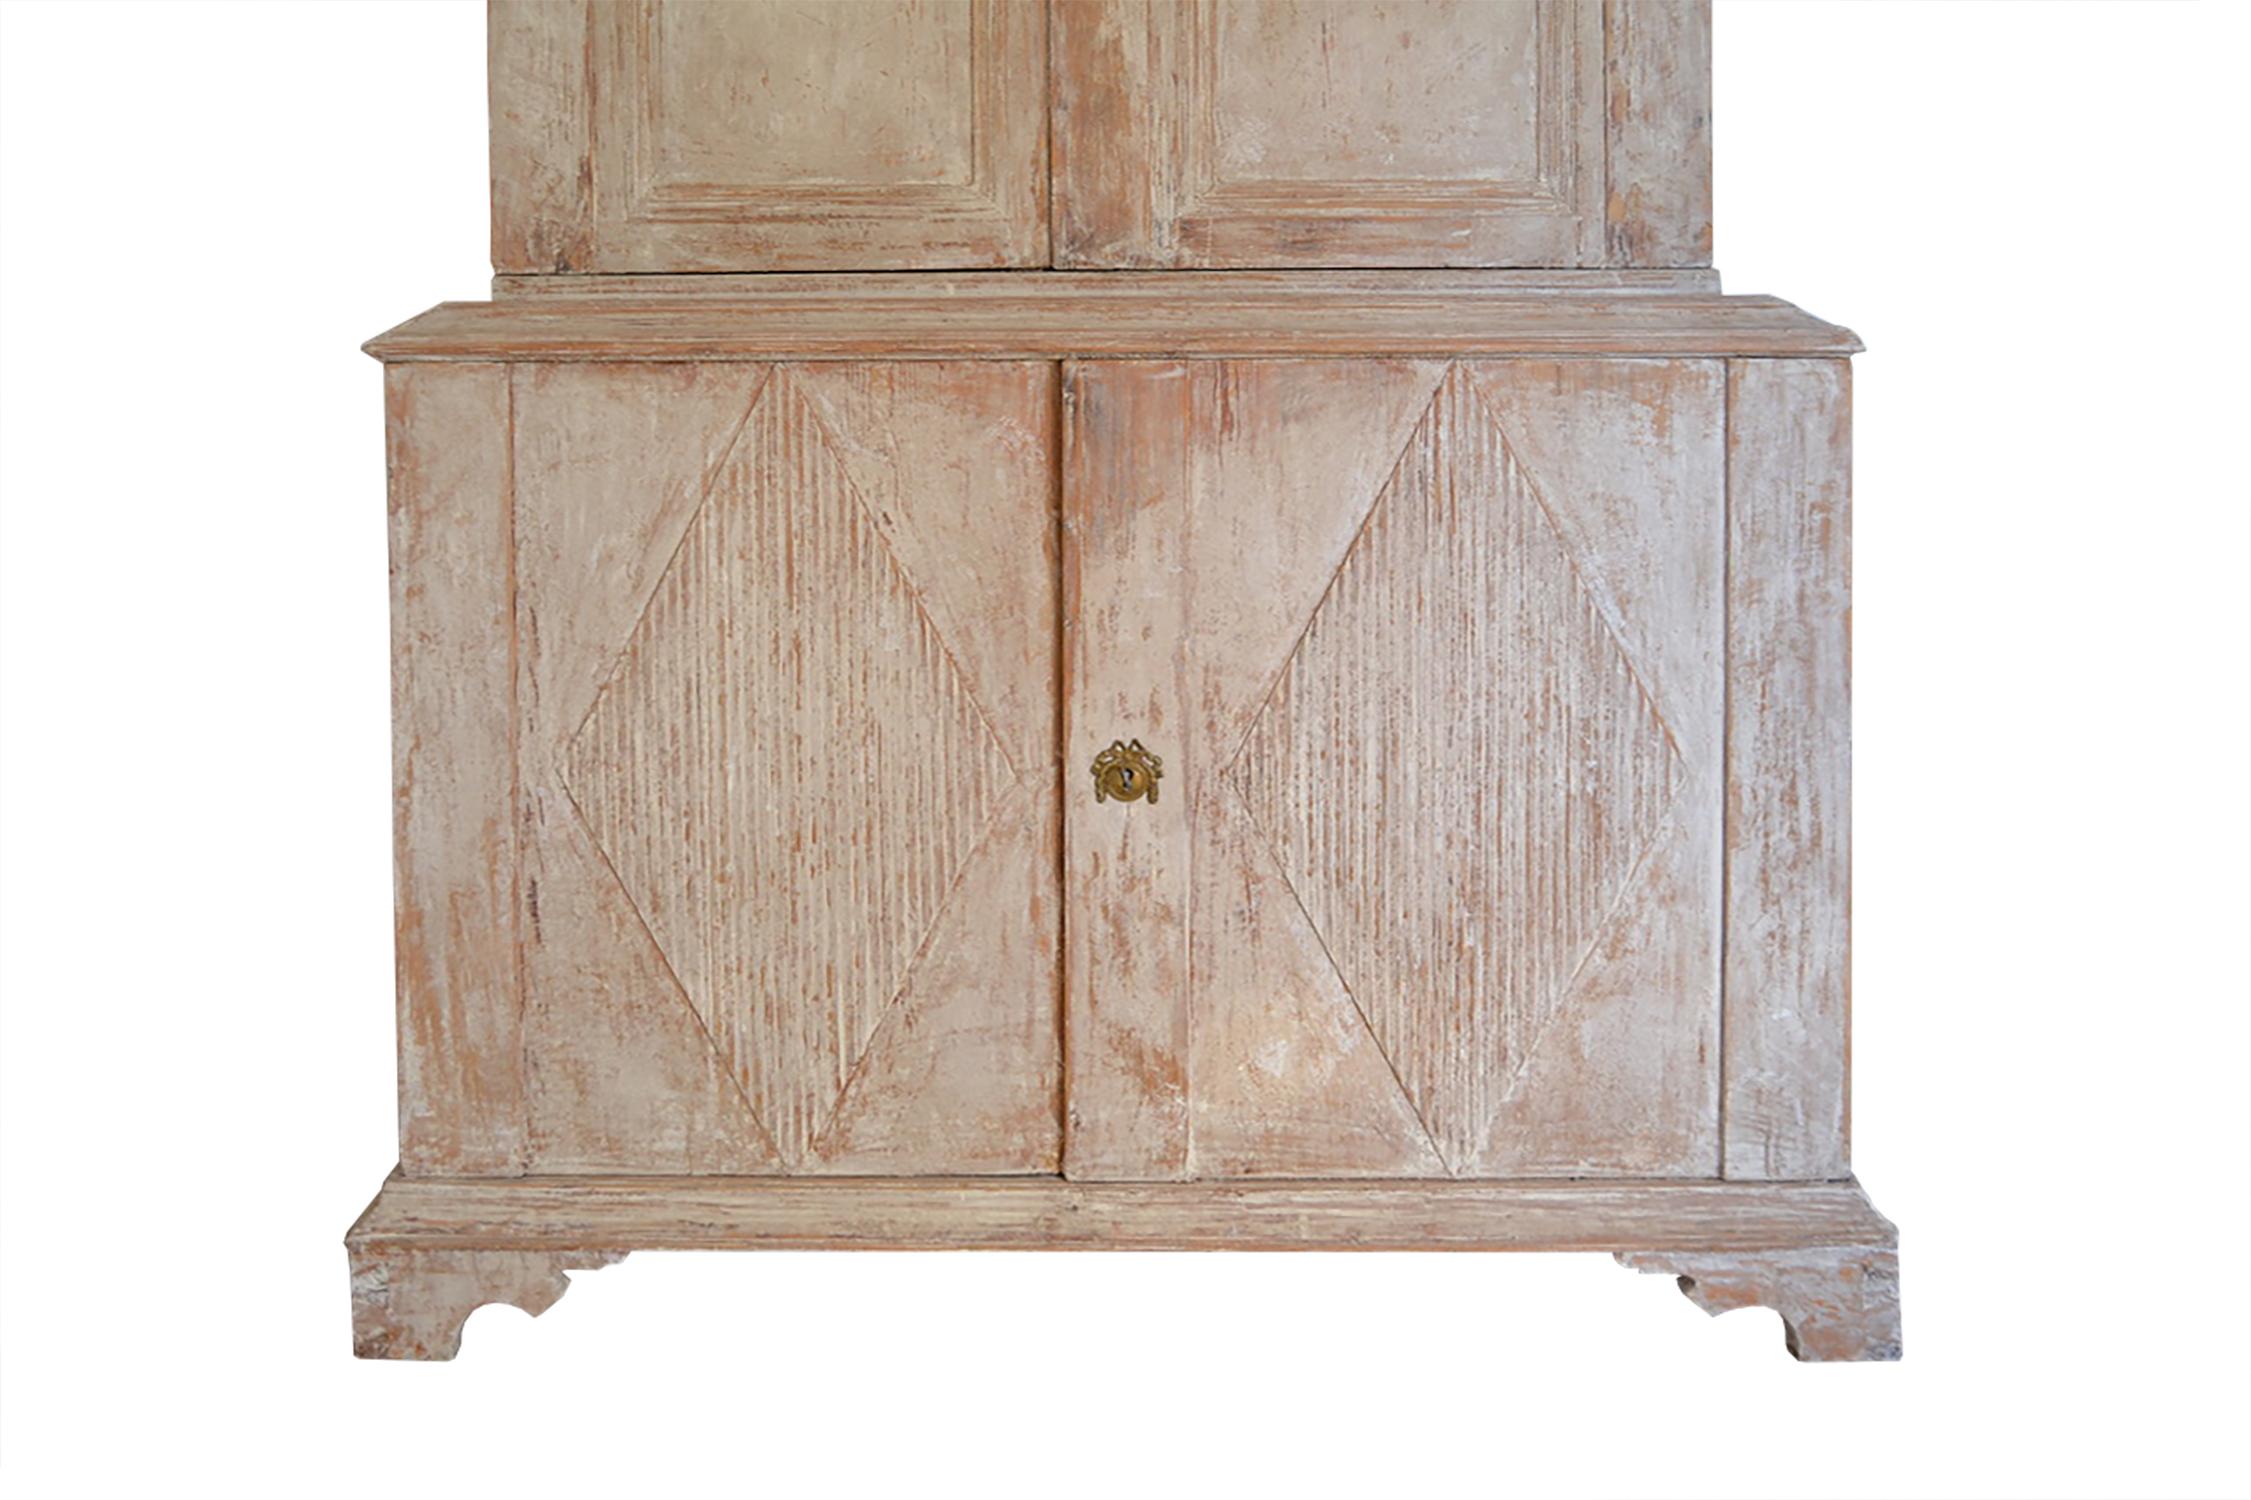 This impressive transition 19th century Rococo Gustavian cupboard was made in the region of Fryksdalen in the landscape of Värmland. Fine original color with decorations on the inside. Restored and complementary hinges with original locks. This